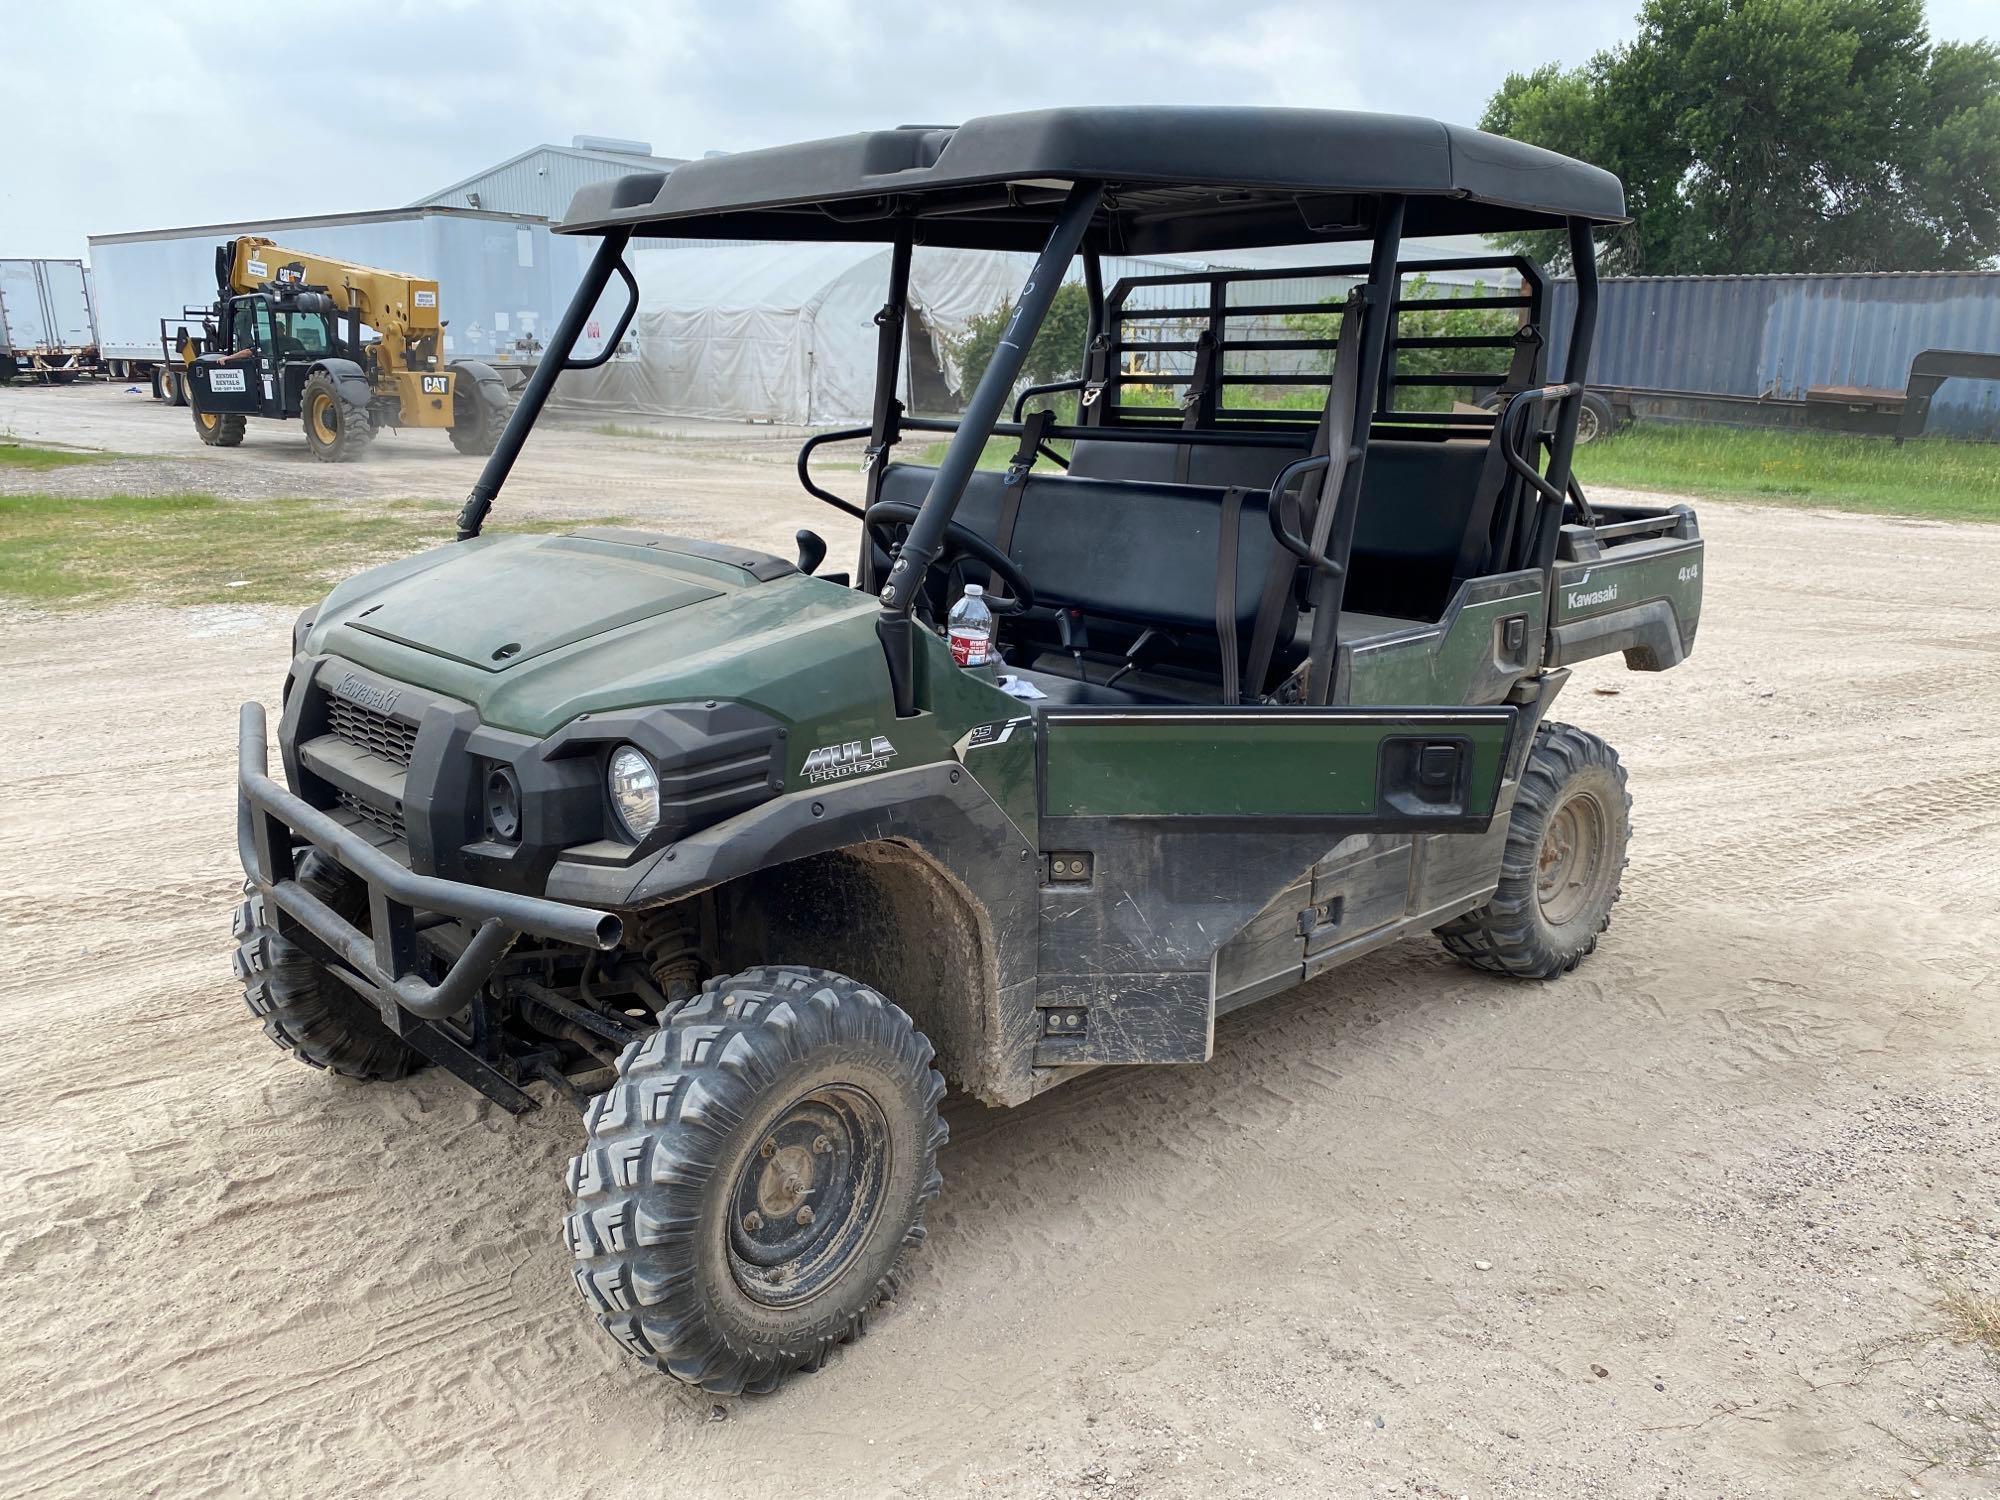 2019 KAWASAKI KAWF820BKF UTILITY VEHICLE SN:513886 4x4, powered by diesel engine, equipped with